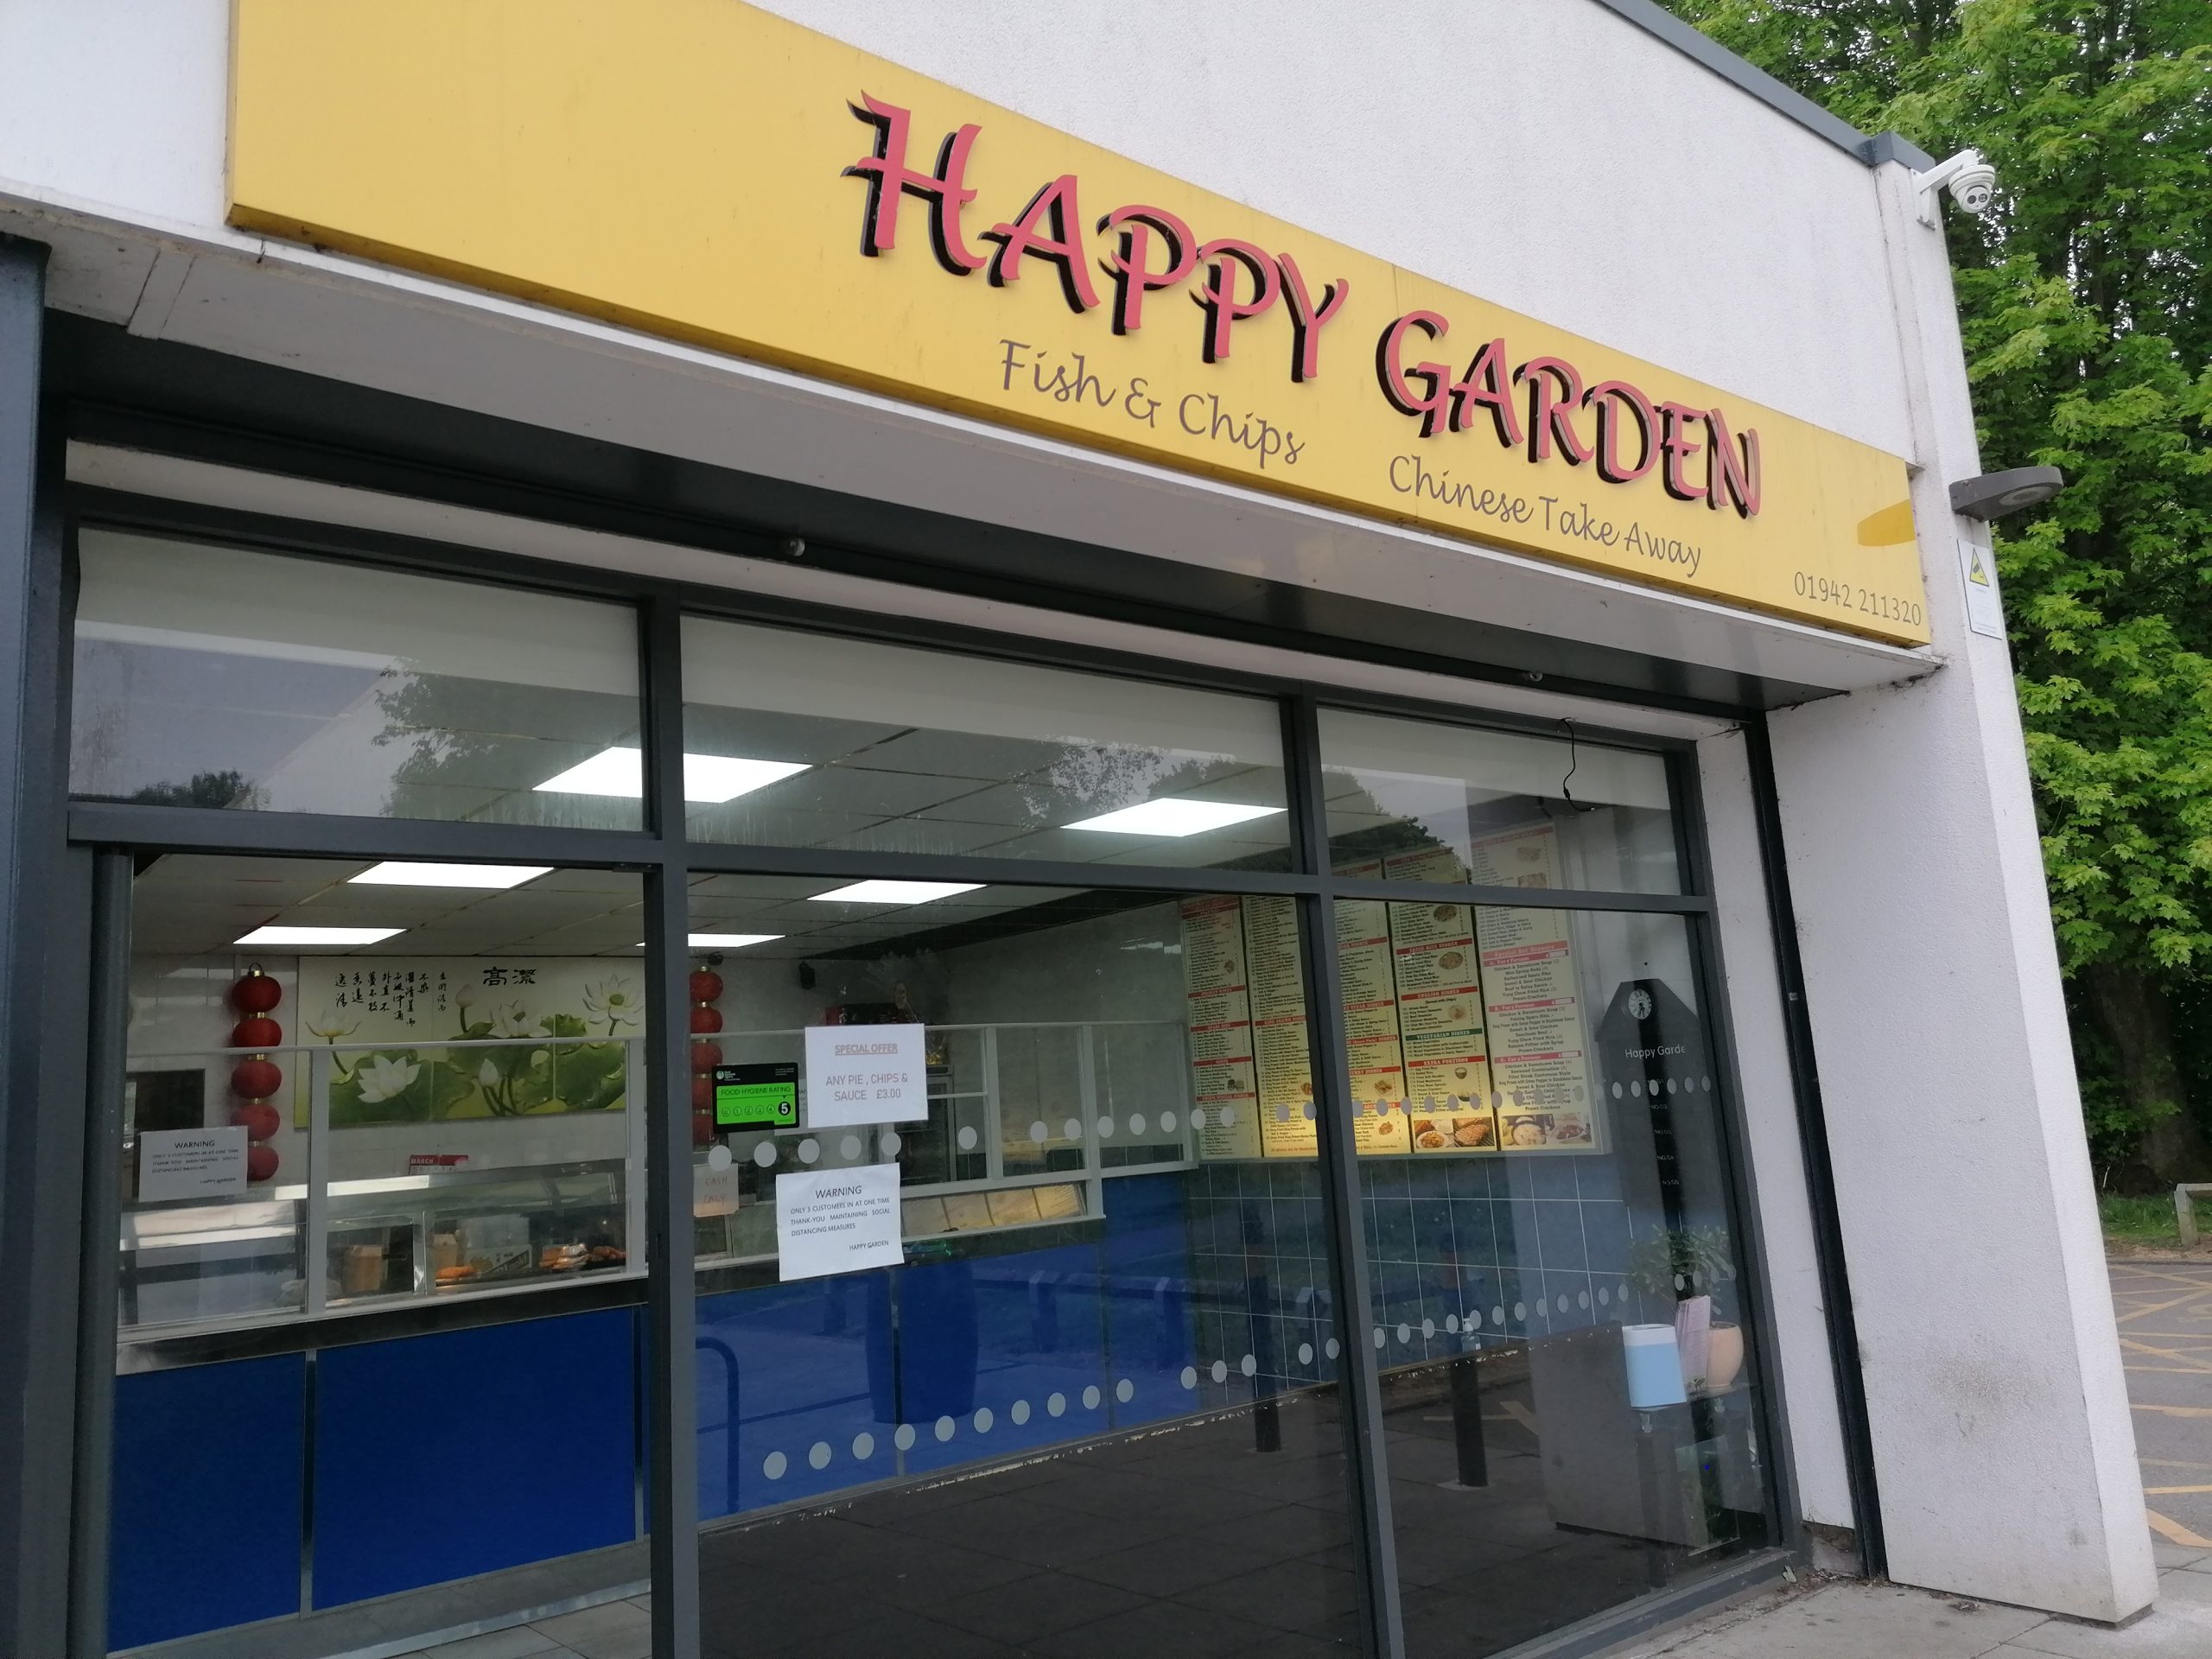 Happy Garden Chinese Re Opens Orders Winstanley Whats On